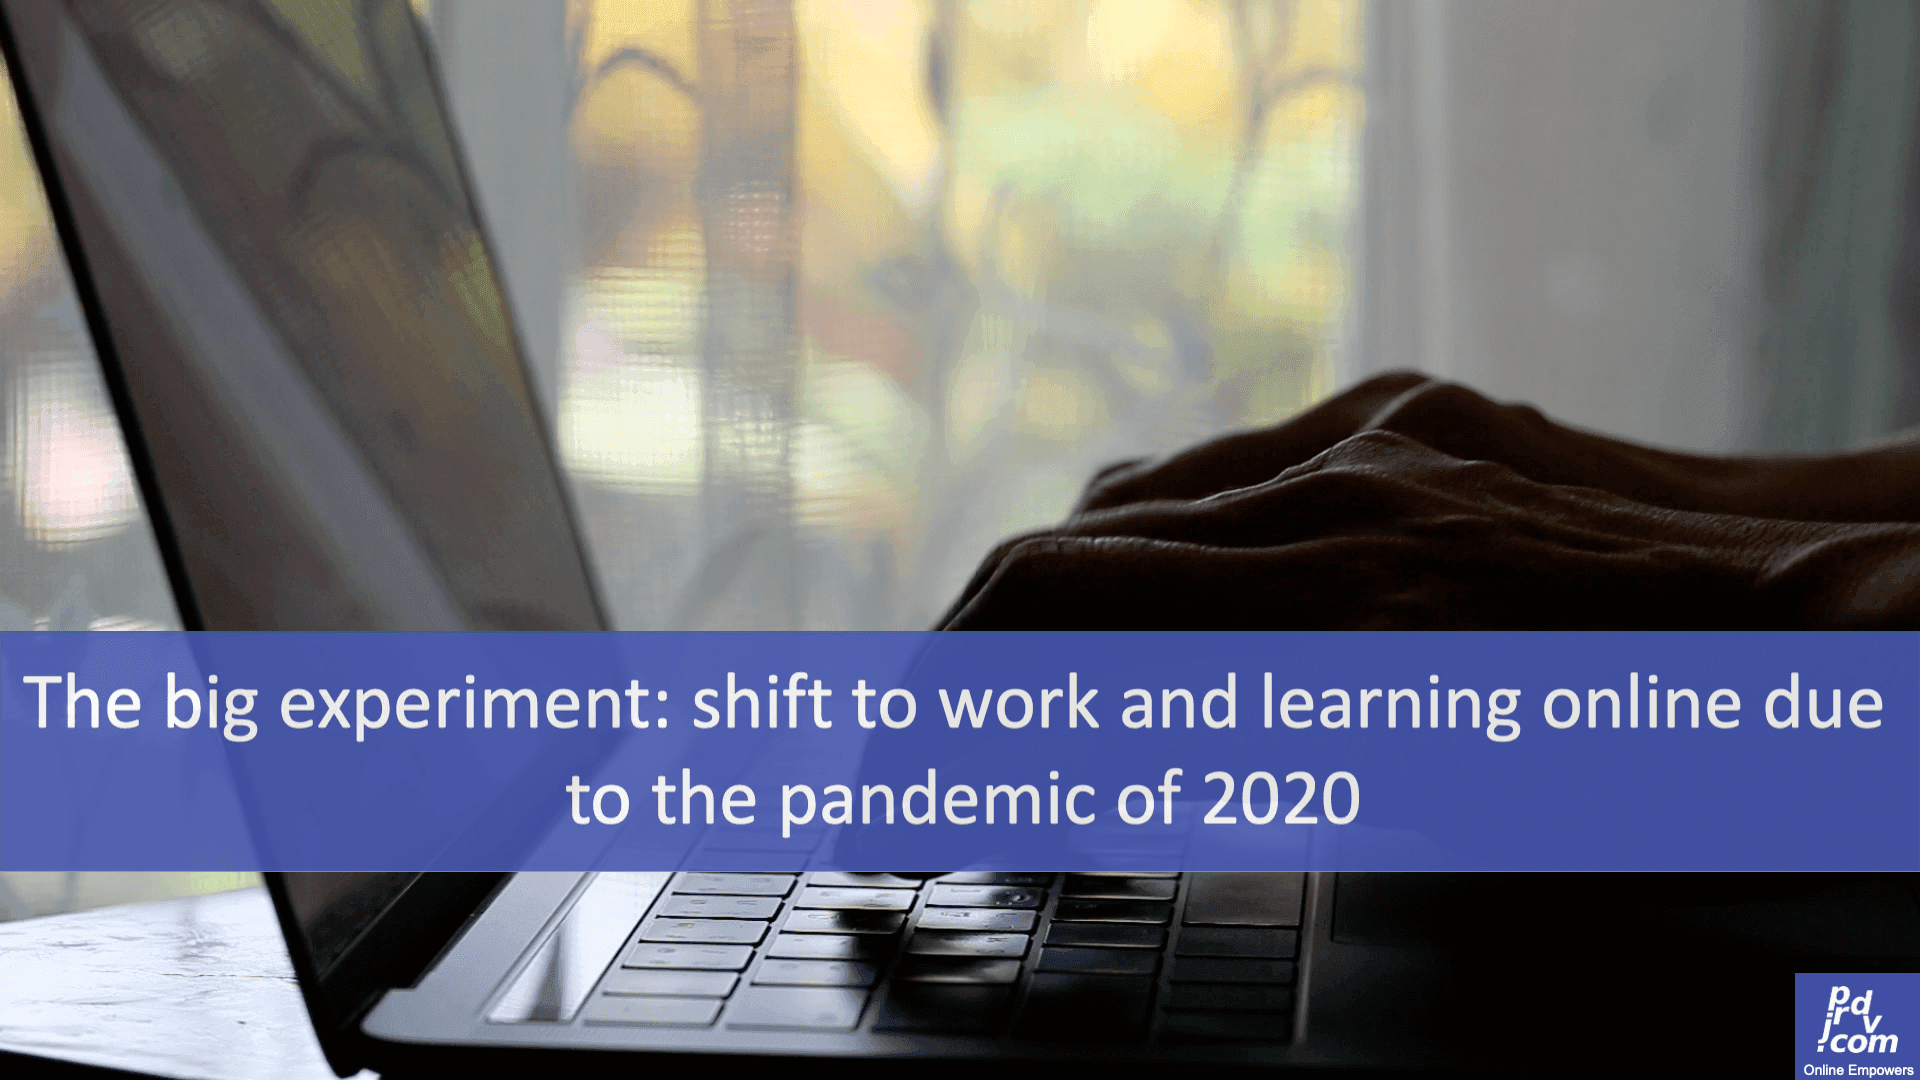 The big experiment: shift to work and learning online due to the pandemic of 2020